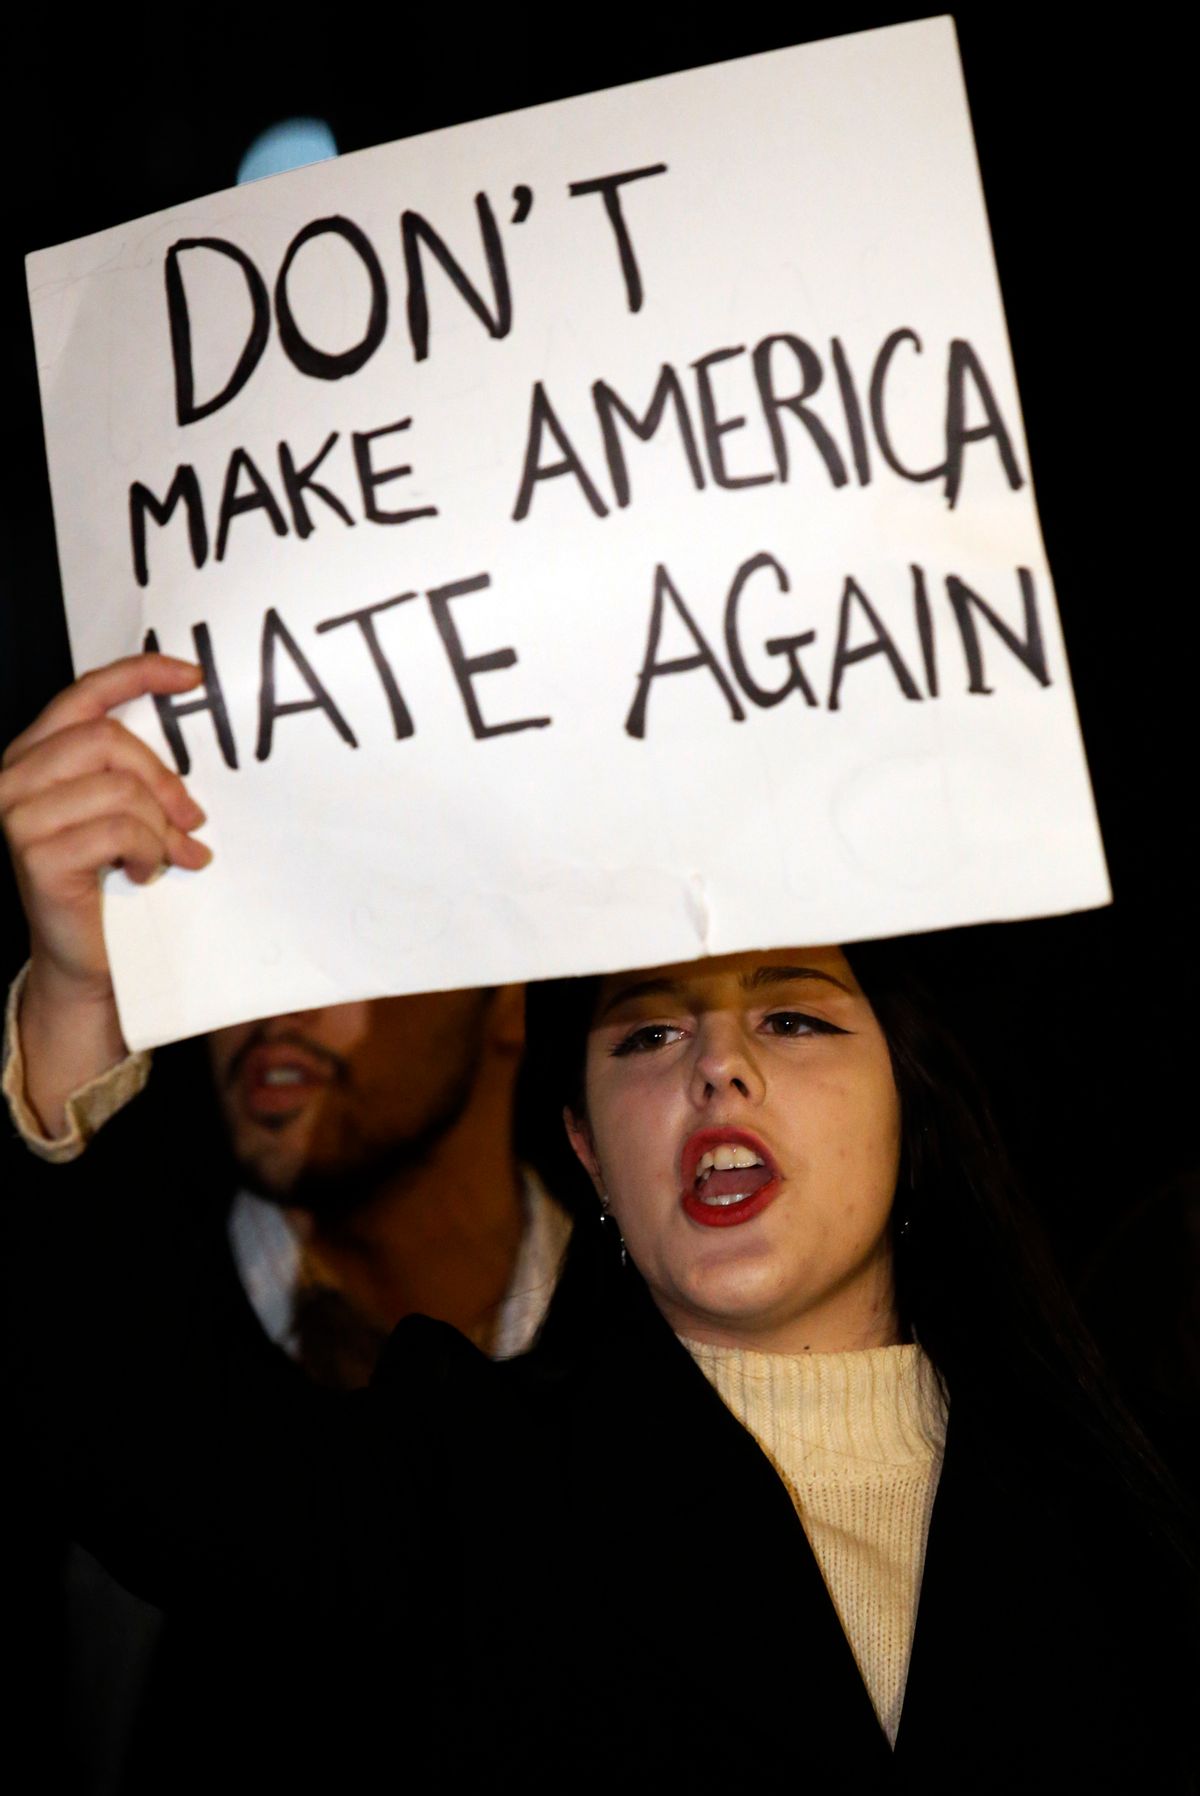 A protester holds a sign during a protest against the election of President-elect Donald Trump in Chicago, Thursday, Nov. 10, 2016. Two days after Trump's election as president, the divisions he exposed only showed signs of widening as many thousands of protesters flooded streets across the country to condemn him. (AP Photo/Nam Y. Huh) (AP)